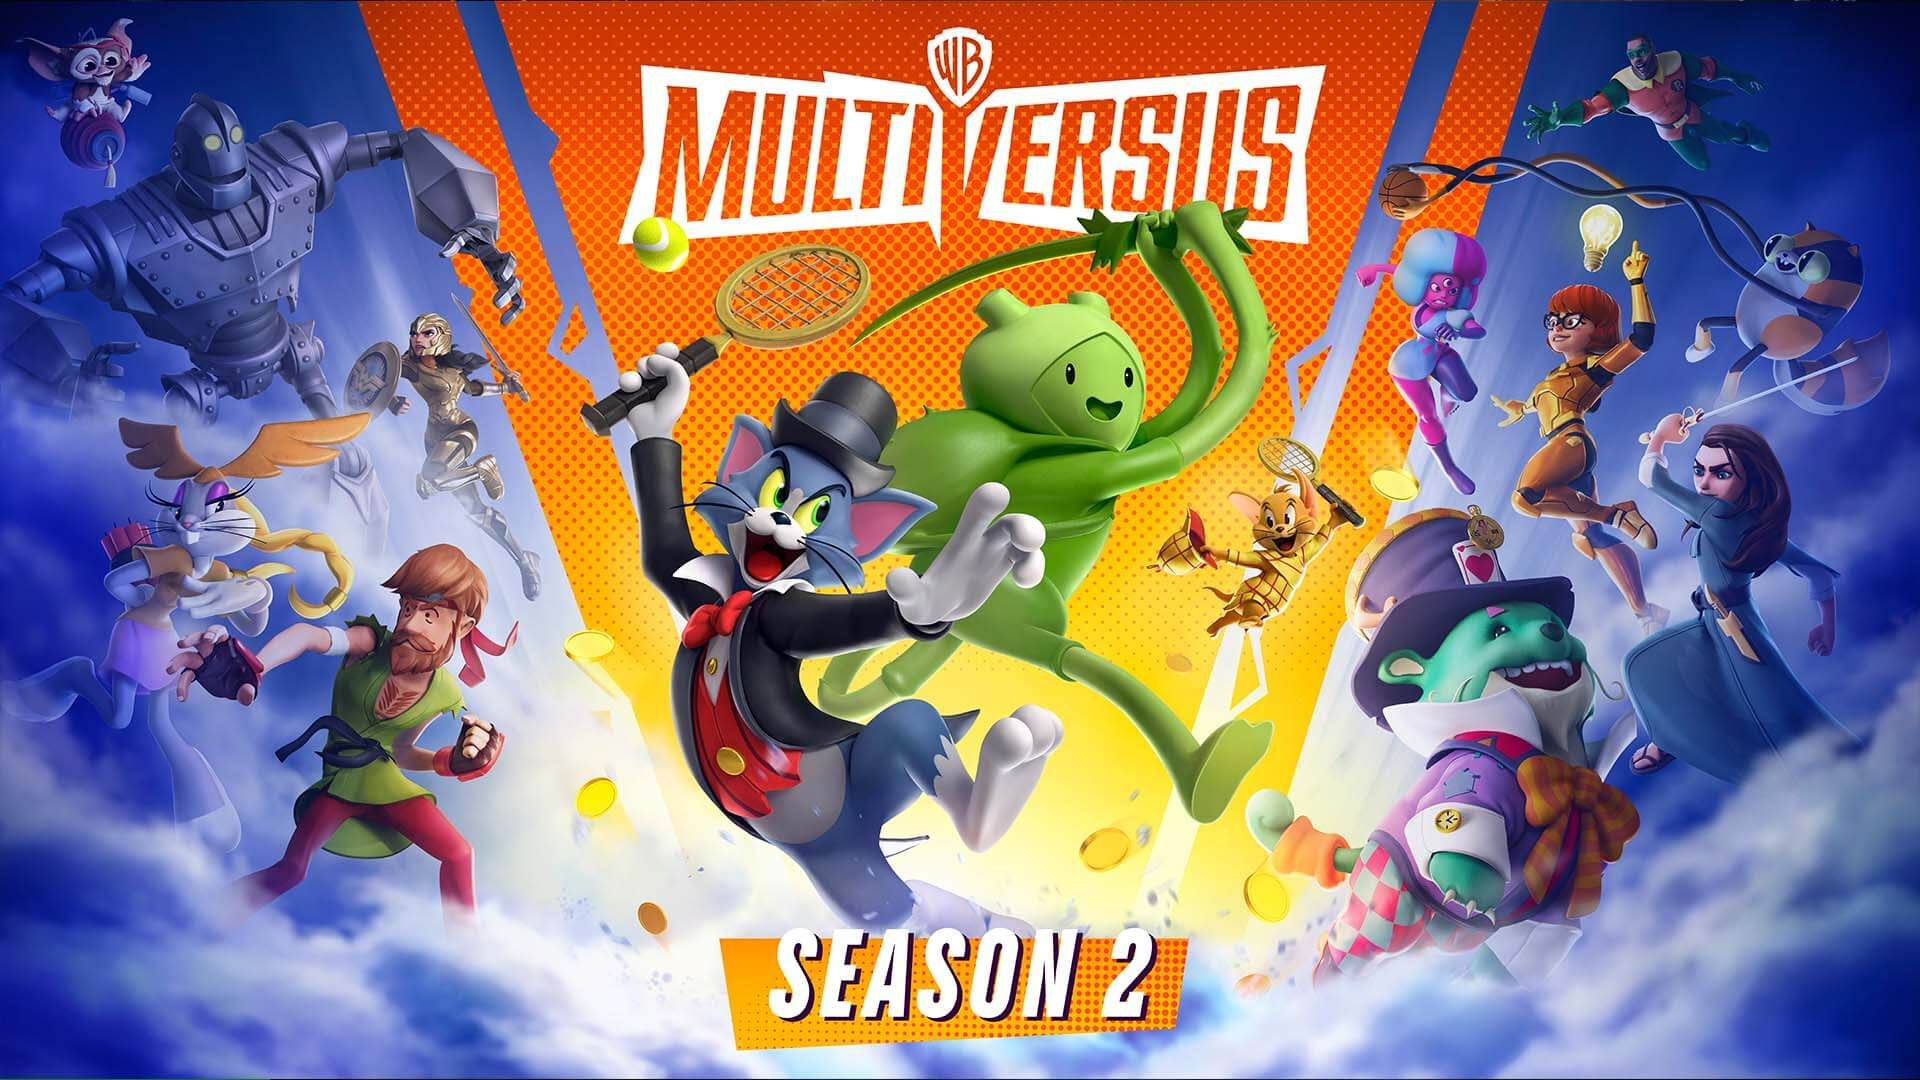 Marvin the Martian will be the first character in MultiVersus Season 2